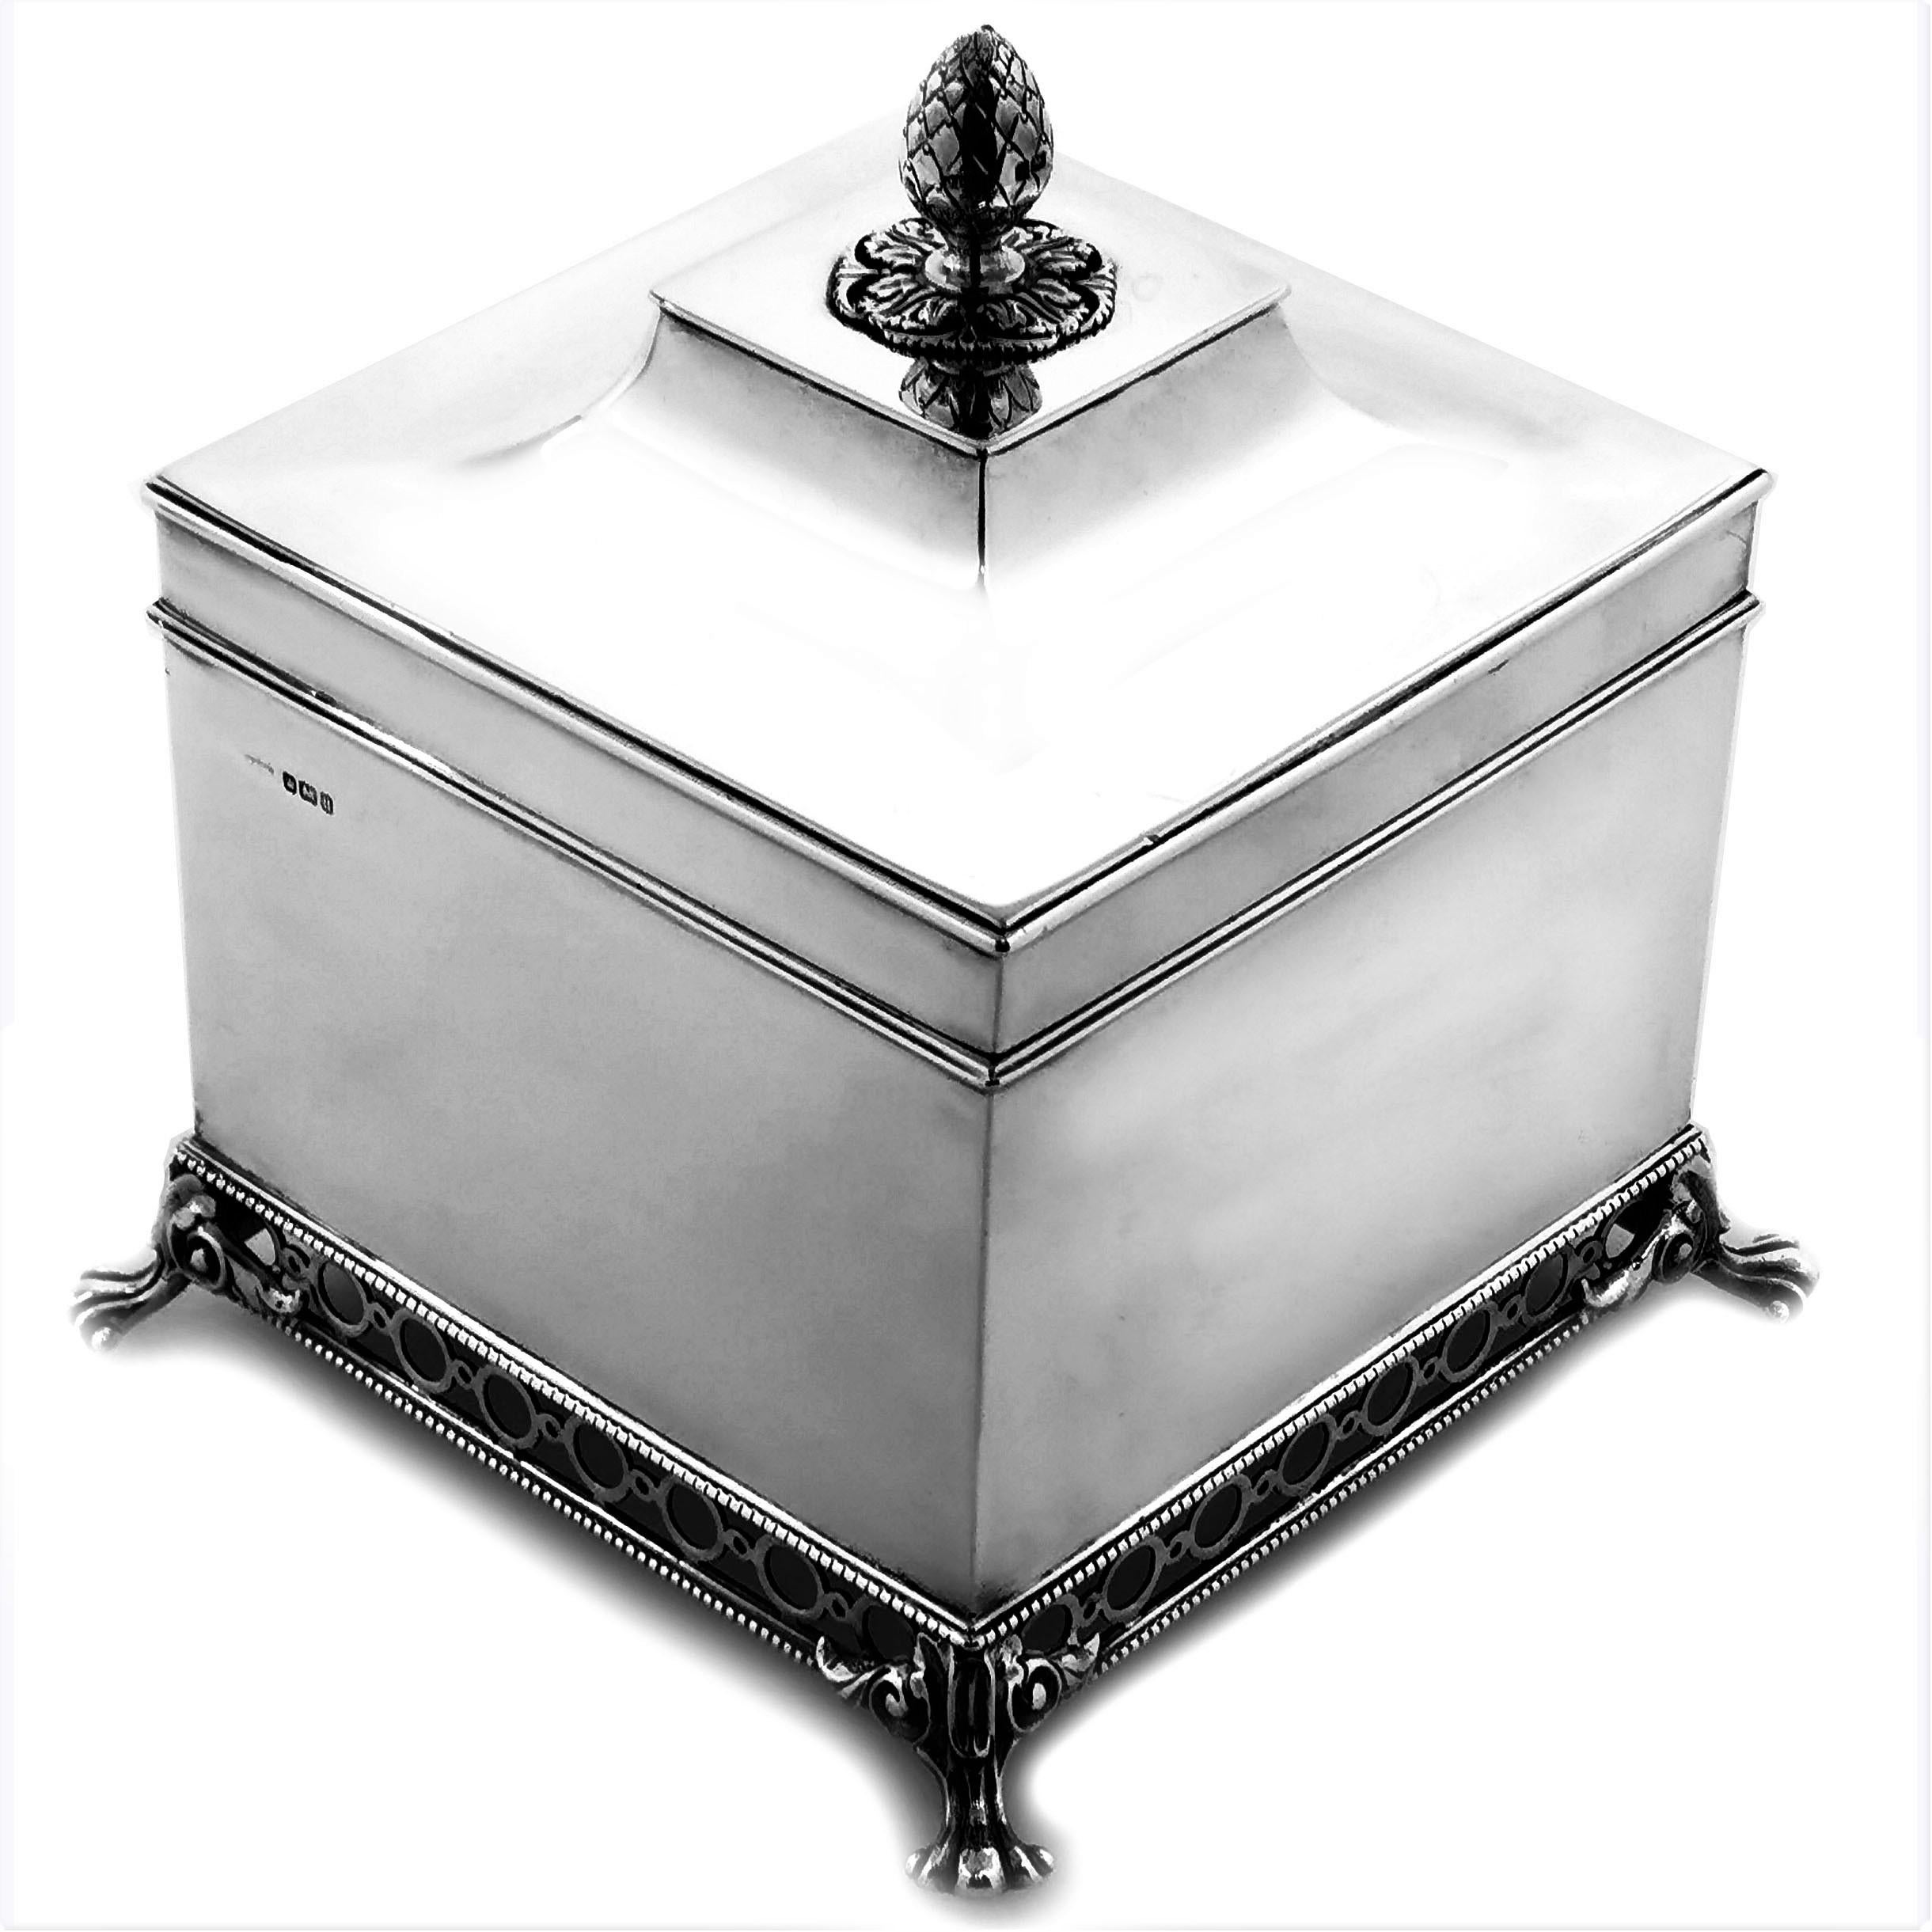 A lovely Antique sterling silver box with a square shape and a elegantly sloped concave lid. This Silver Box has a highly polished finish. The Box has an impressive finial and stands on a pierced border supported by four claw feet.

Made in 1912